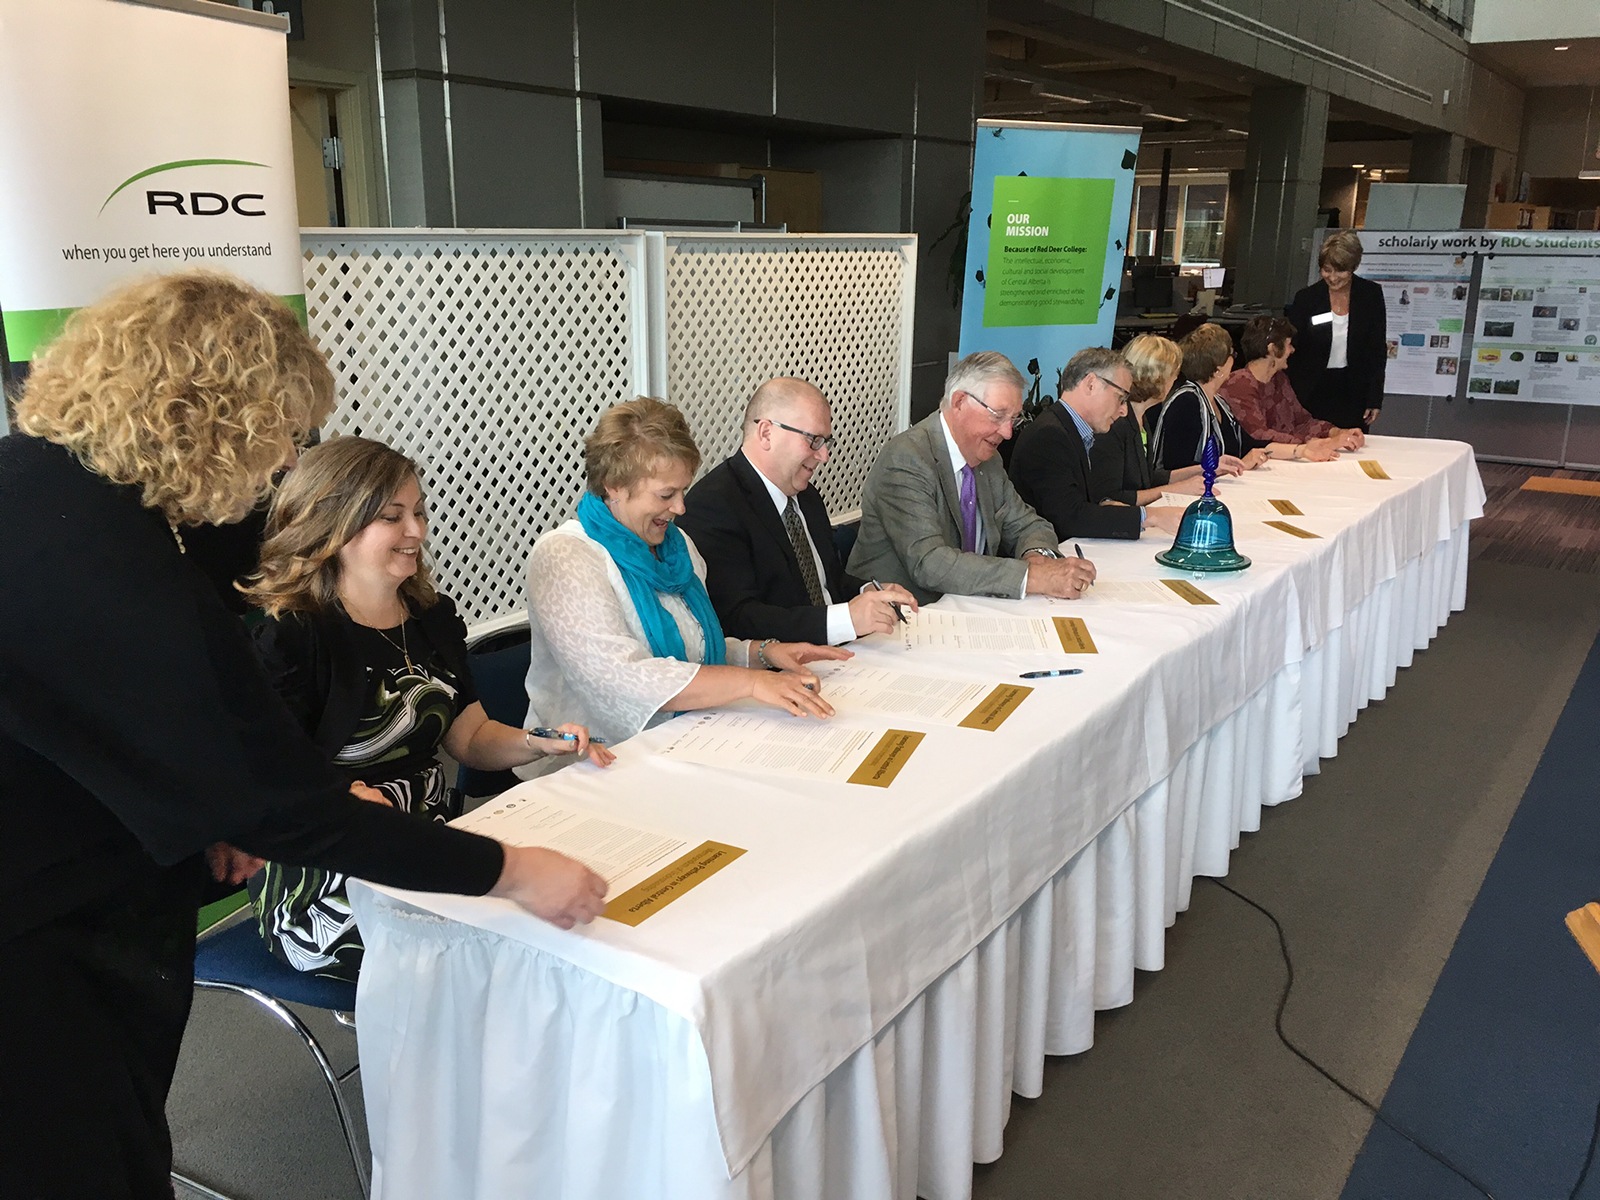 WORKING TOGETHER - Representatives from Red Deer College along with seven local school divisions gathered Wednesday to renew their ongoing partnership called Learning Pathways in Central Alberta